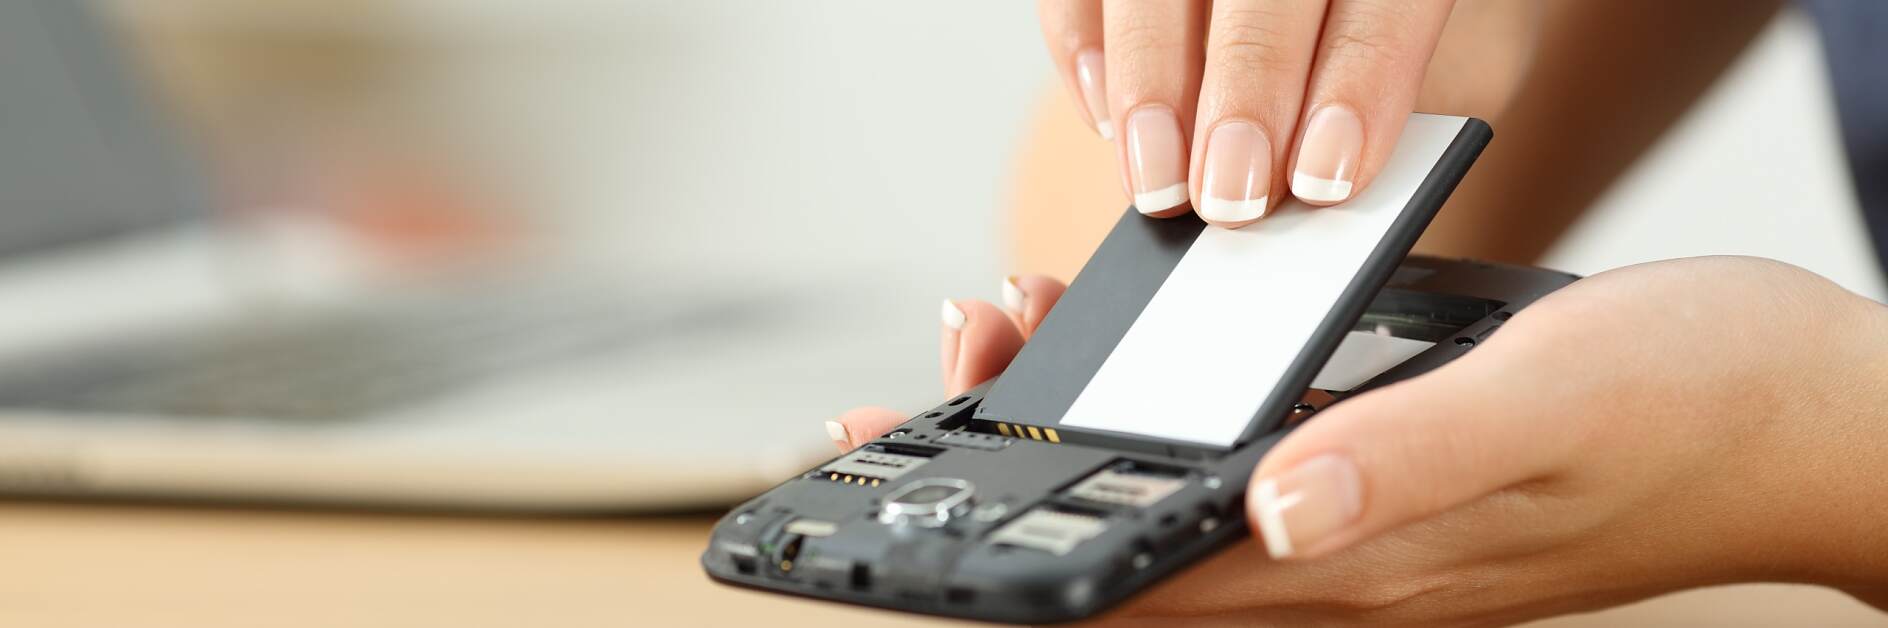 Woman hand putting a battery into a smart phone